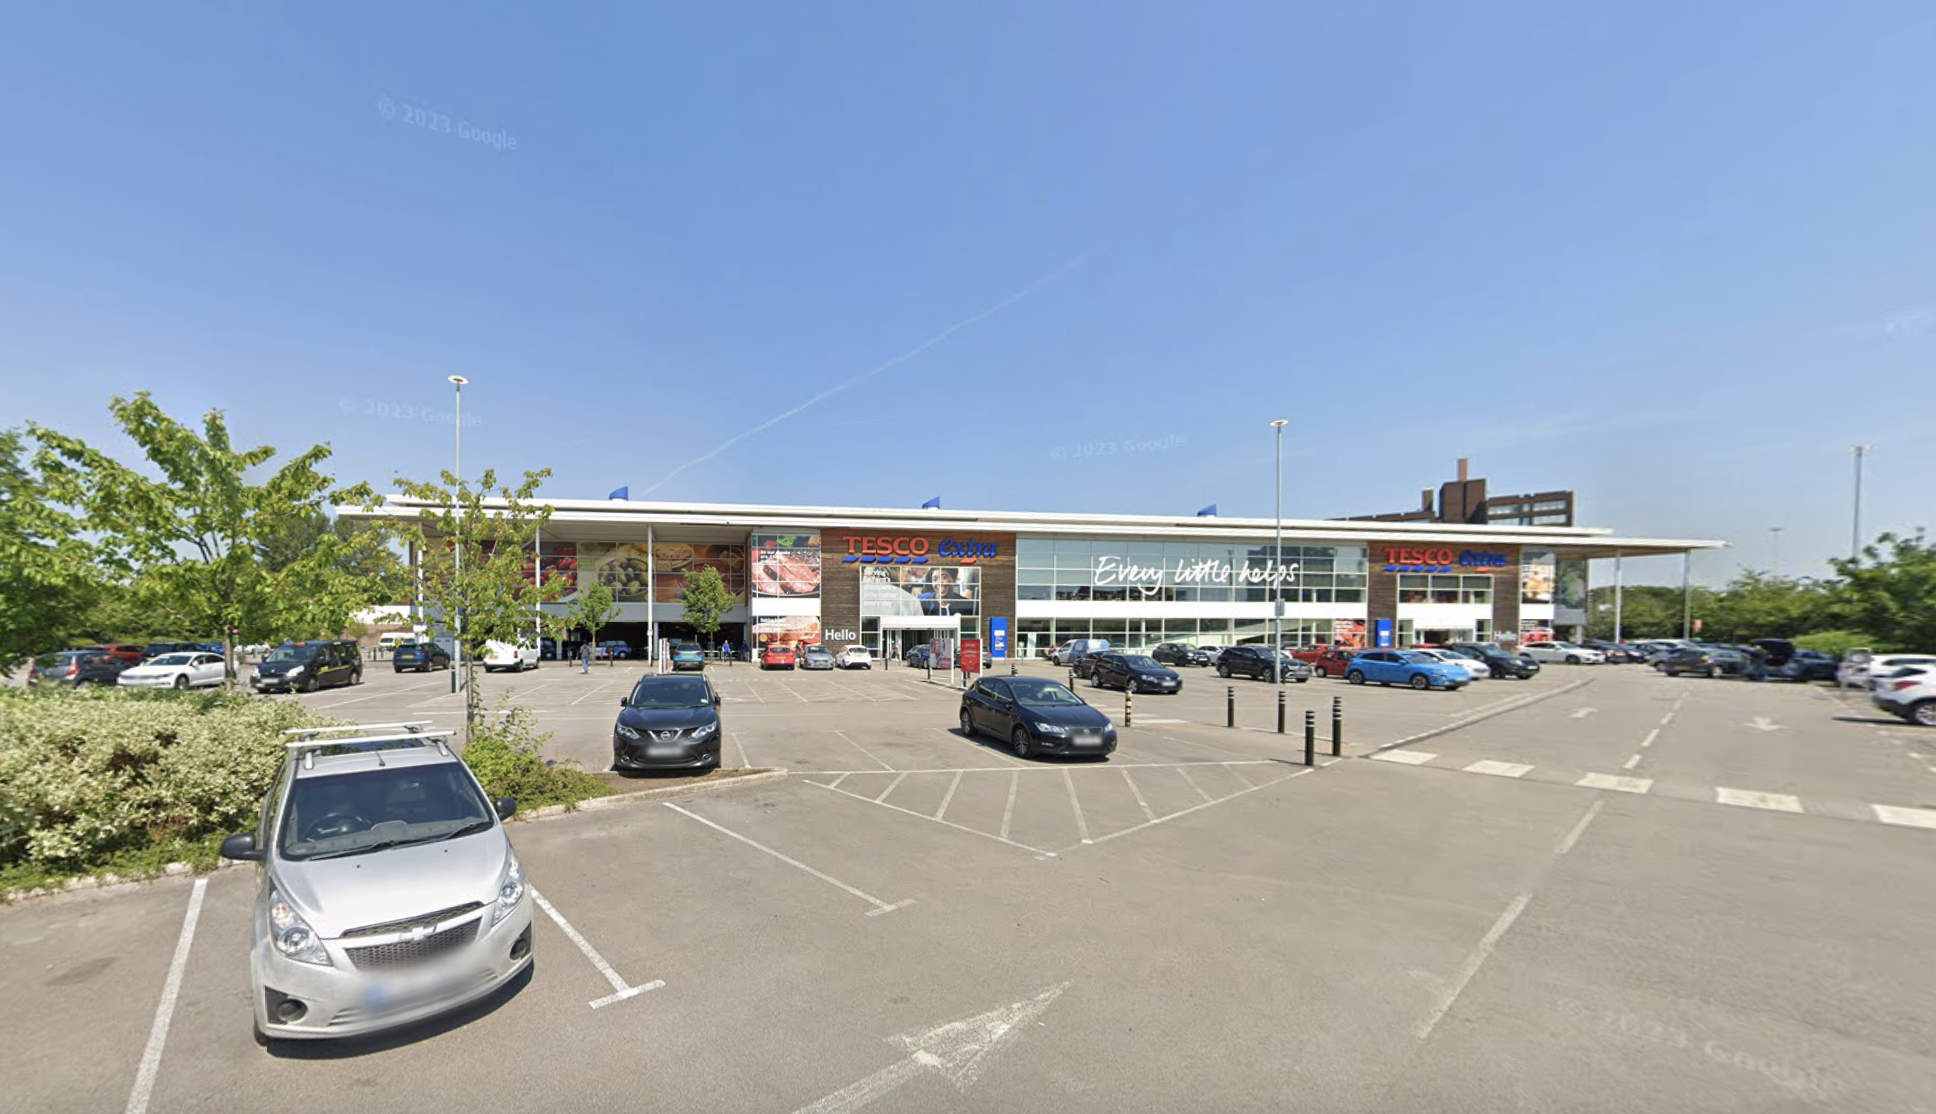 Police appeal launched after man, 81, hit by vehicle in Tesco car park